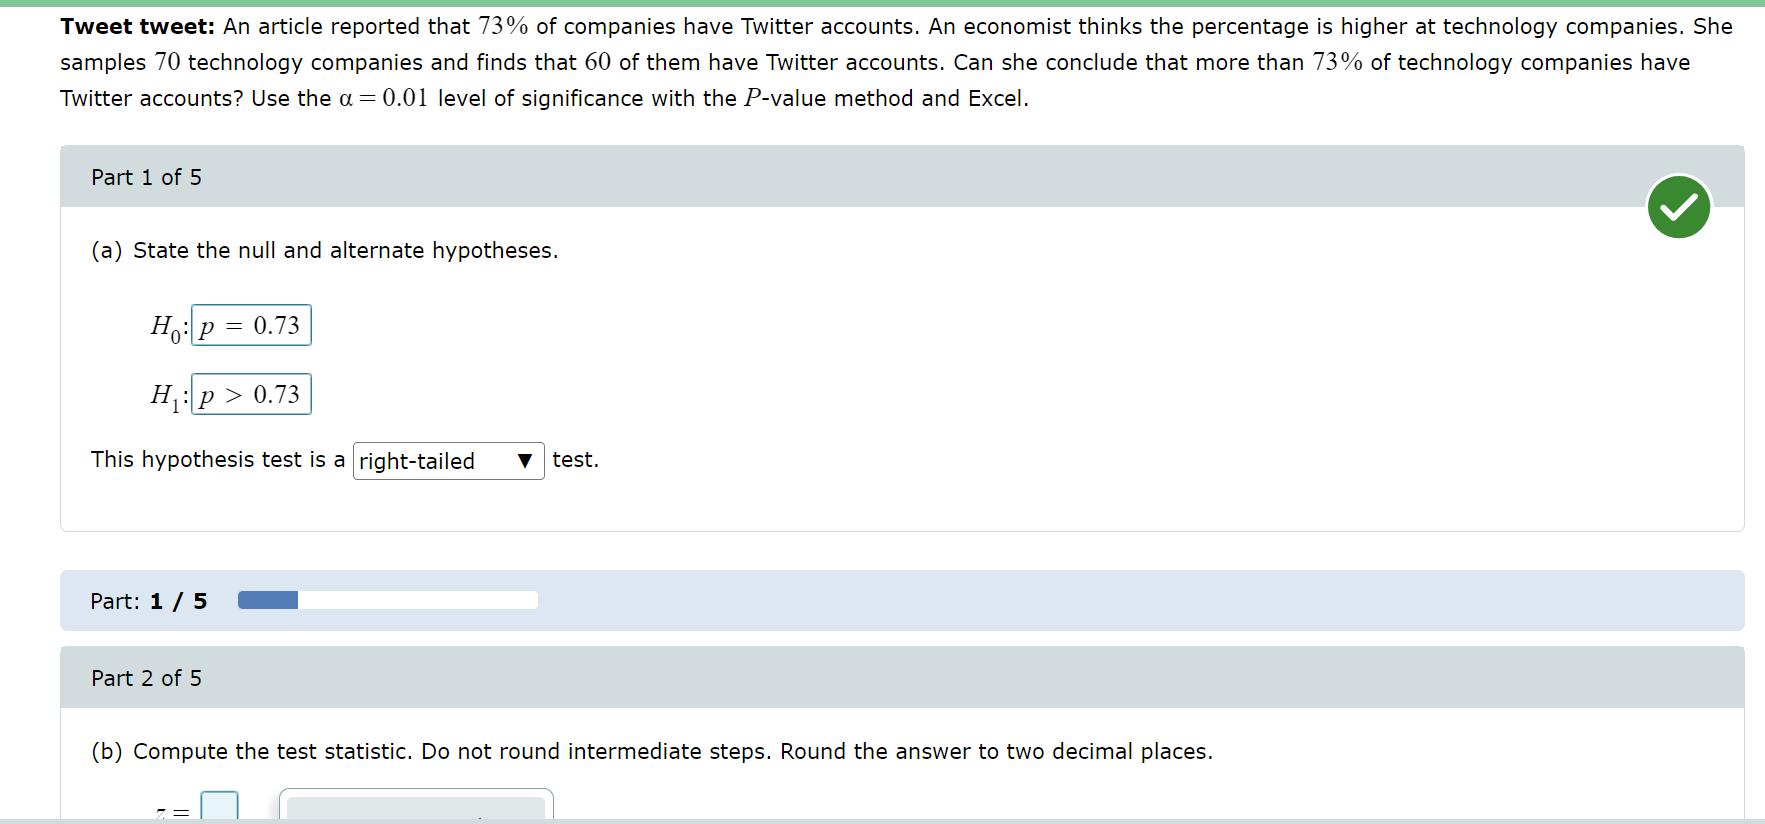 Tweet tweet: An article reported that 73% of companies have Twitter accounts. An economist thinks the